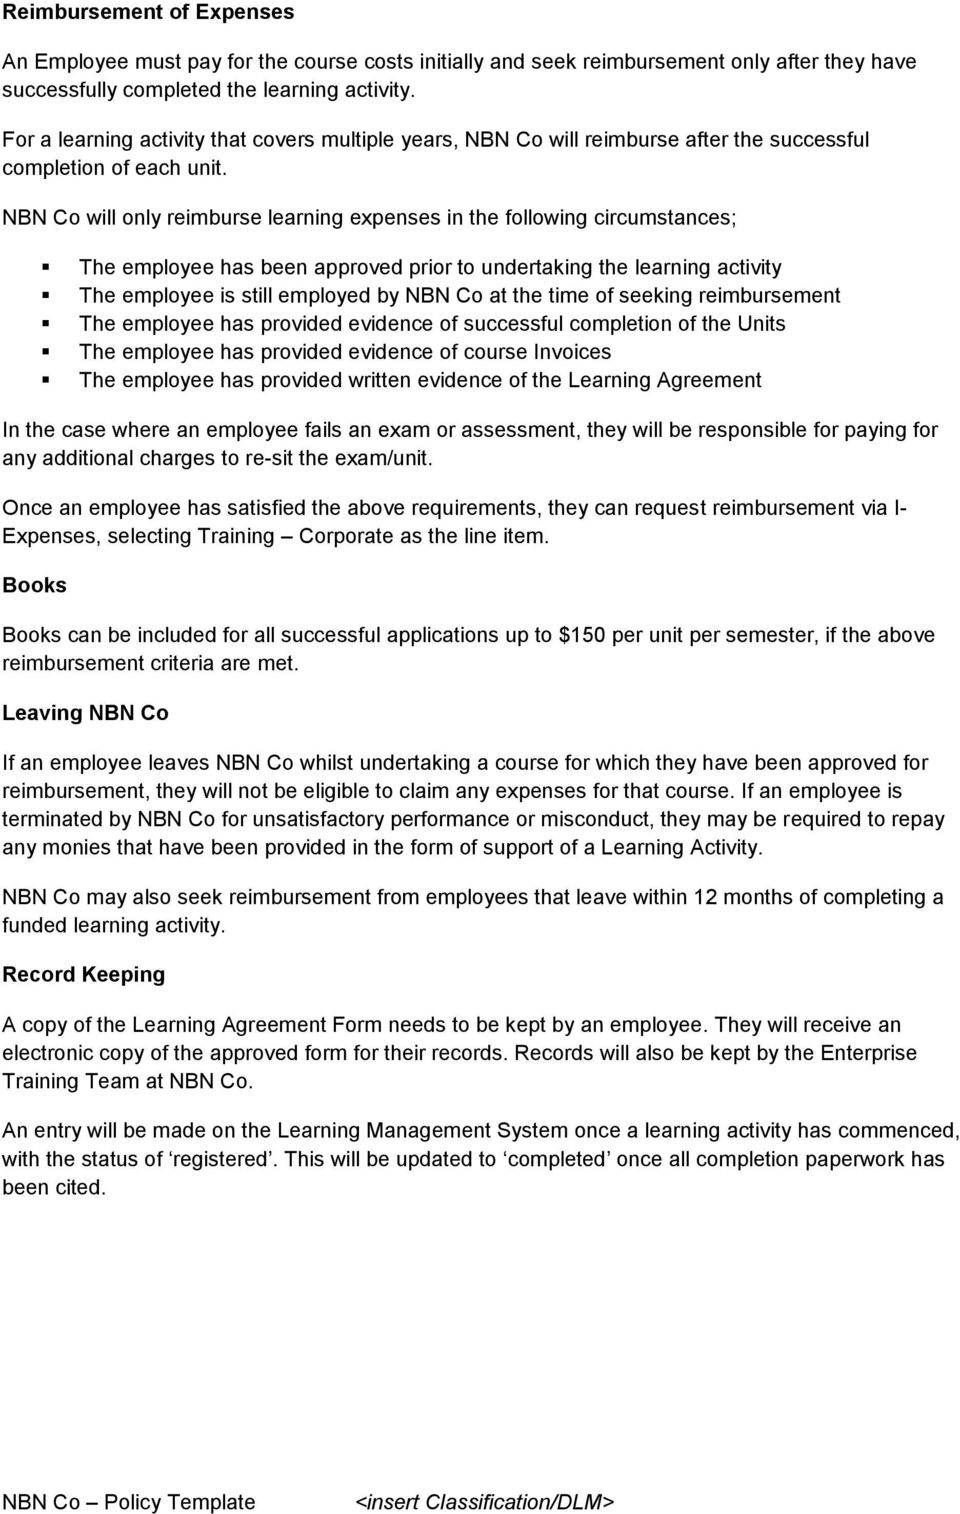 NBN Co will only reimburse learning expenses in the following circumstances; The employee has been approved prior to undertaking the learning activity The employee is still employed by NBN Co at the